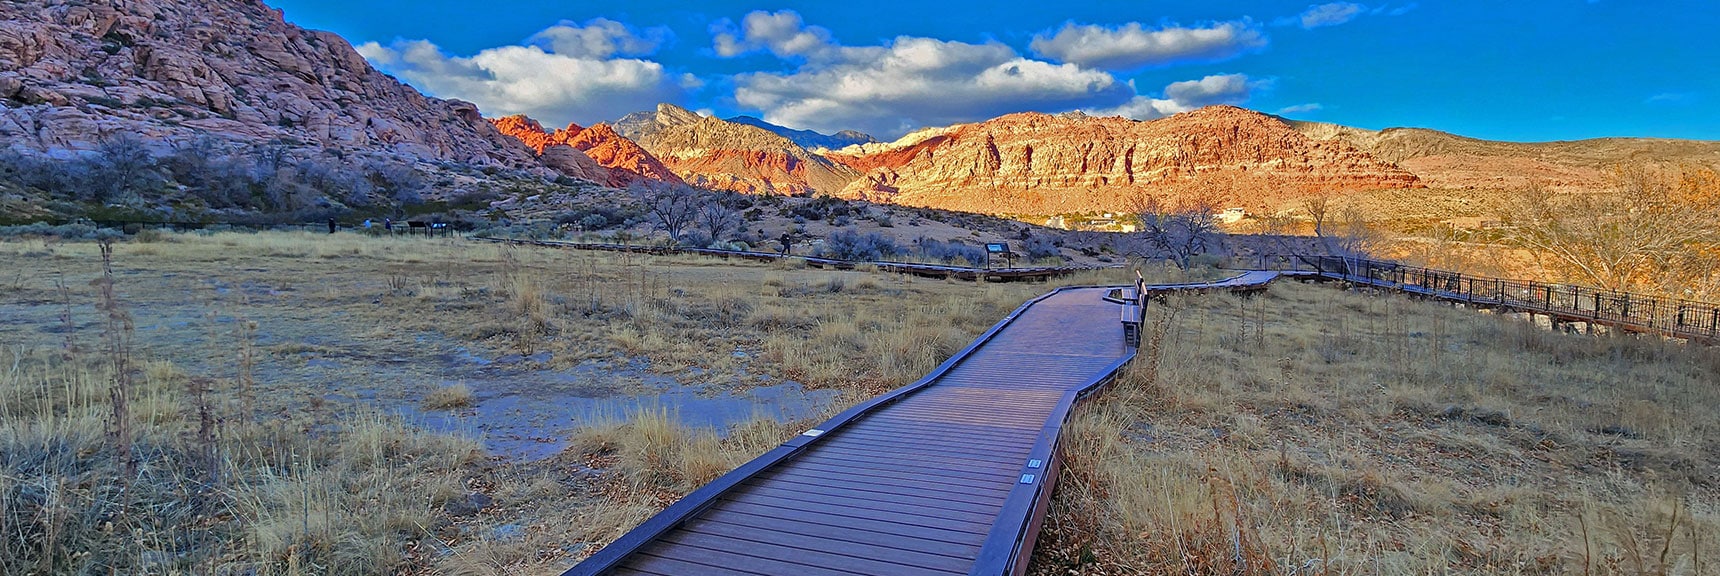 Boardwalk Takes You Back to the Parking Area | Lower Calico Hills Loop | Calico Basin & Red Rock Canyon, Nevada